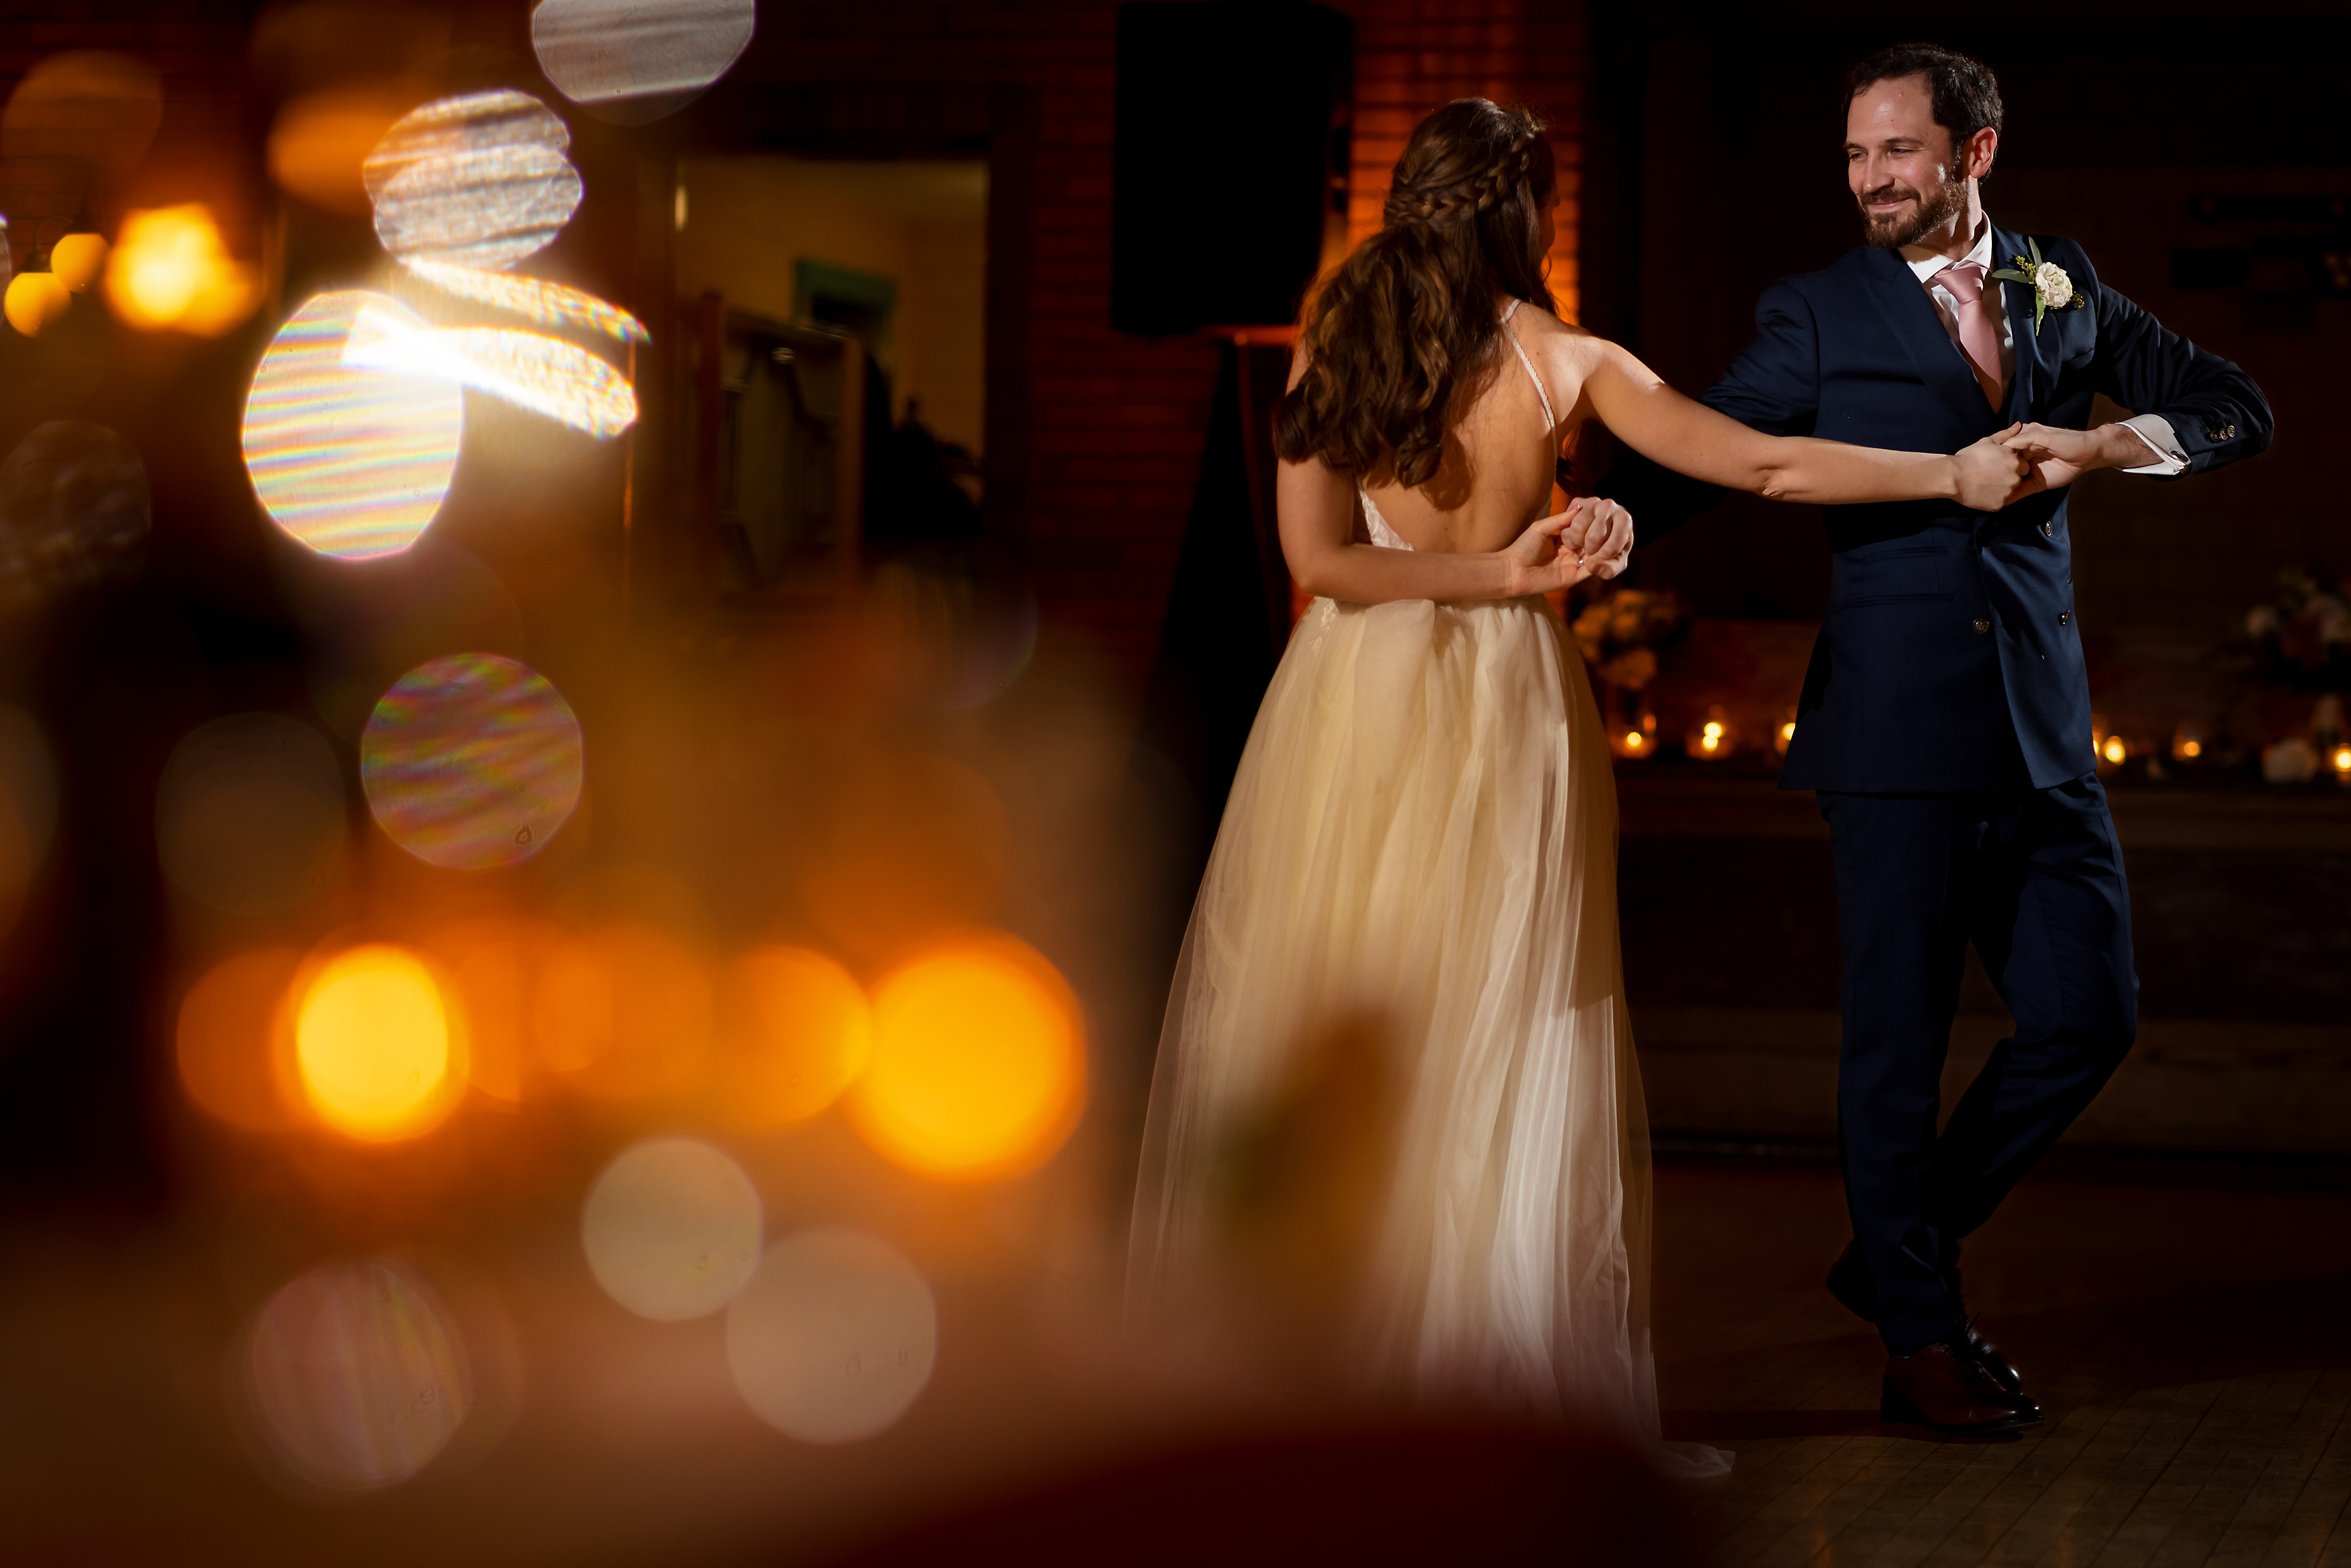 Couple shares their choreographed first dance during wedding reception at Cafe Brauer in Chicago's Lincoln Park neighborhood